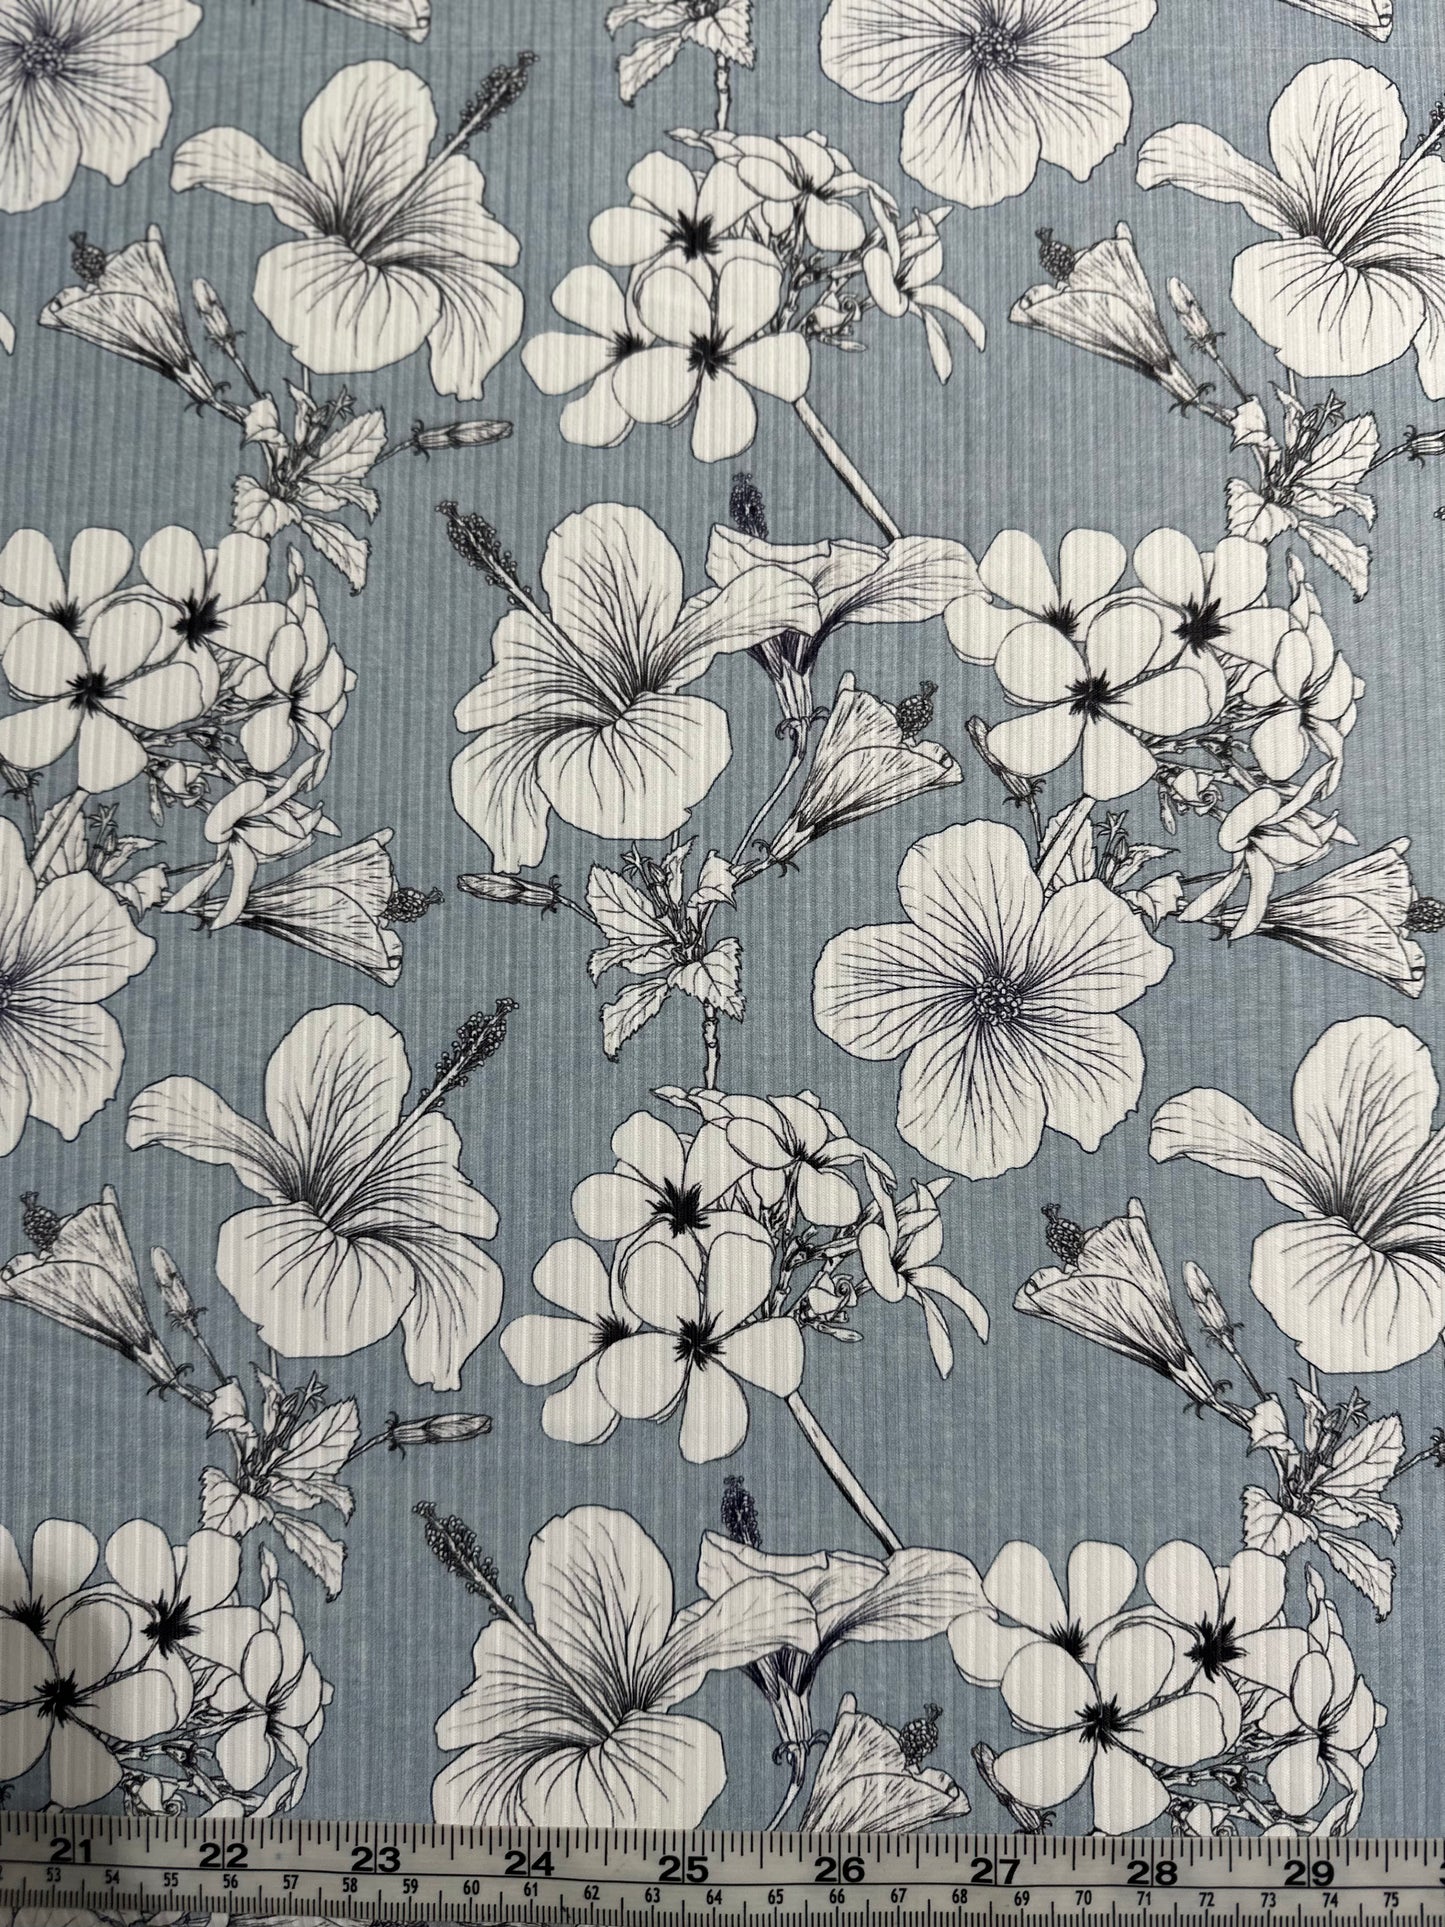 Tropical Jill Floral in Blue on Unbrushed Rib Knit Fabric Sold by the 1/4 yard